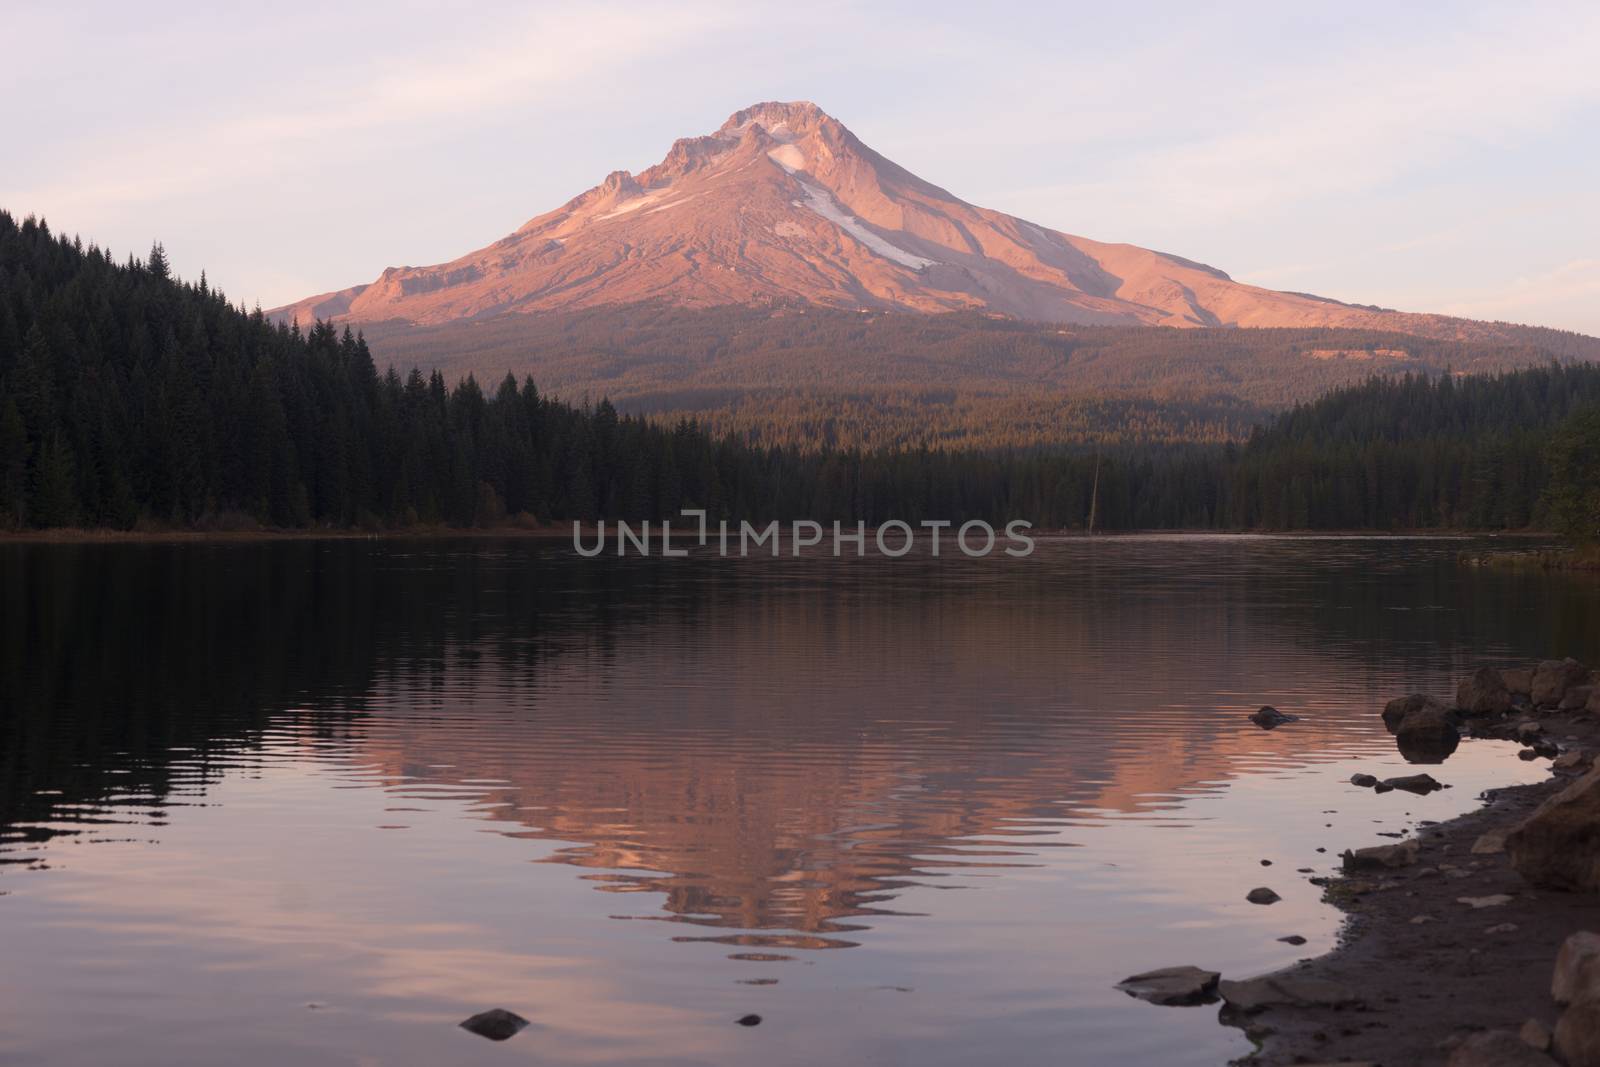 Mount Hood stands alone in the fall at sunrise above peaceful Trillium Lake